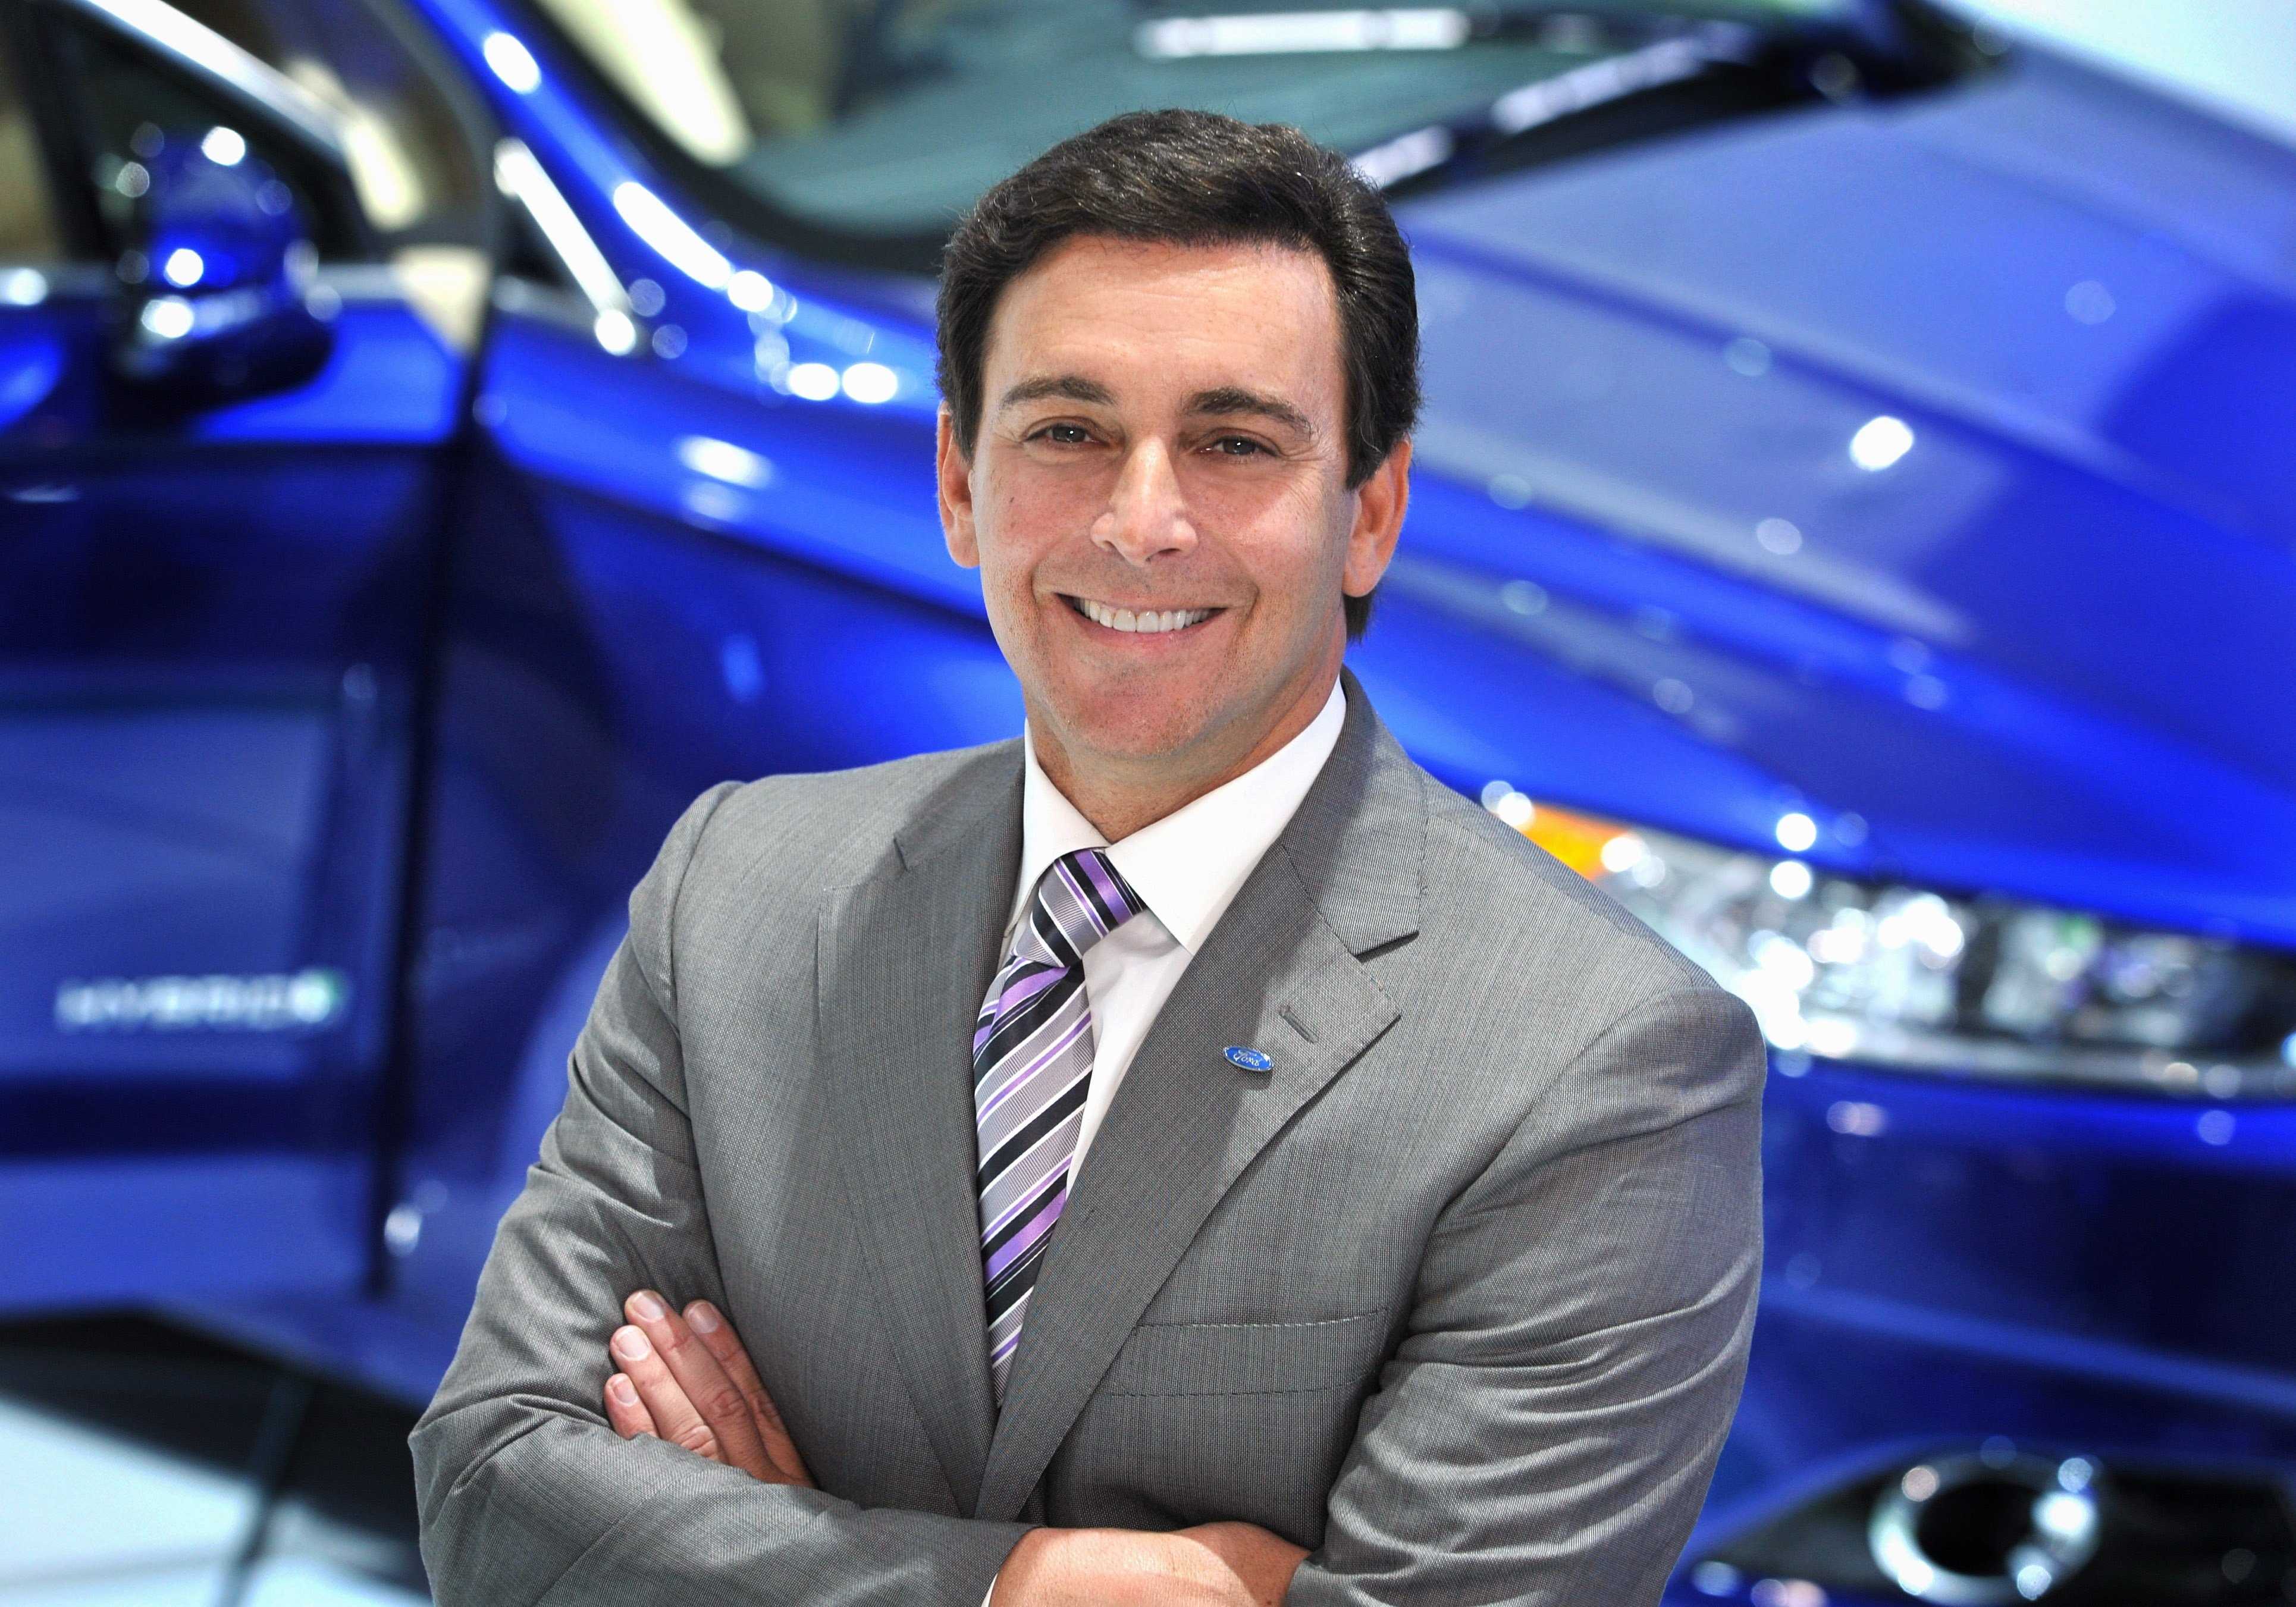 Ford replaces CEO in push to transform business